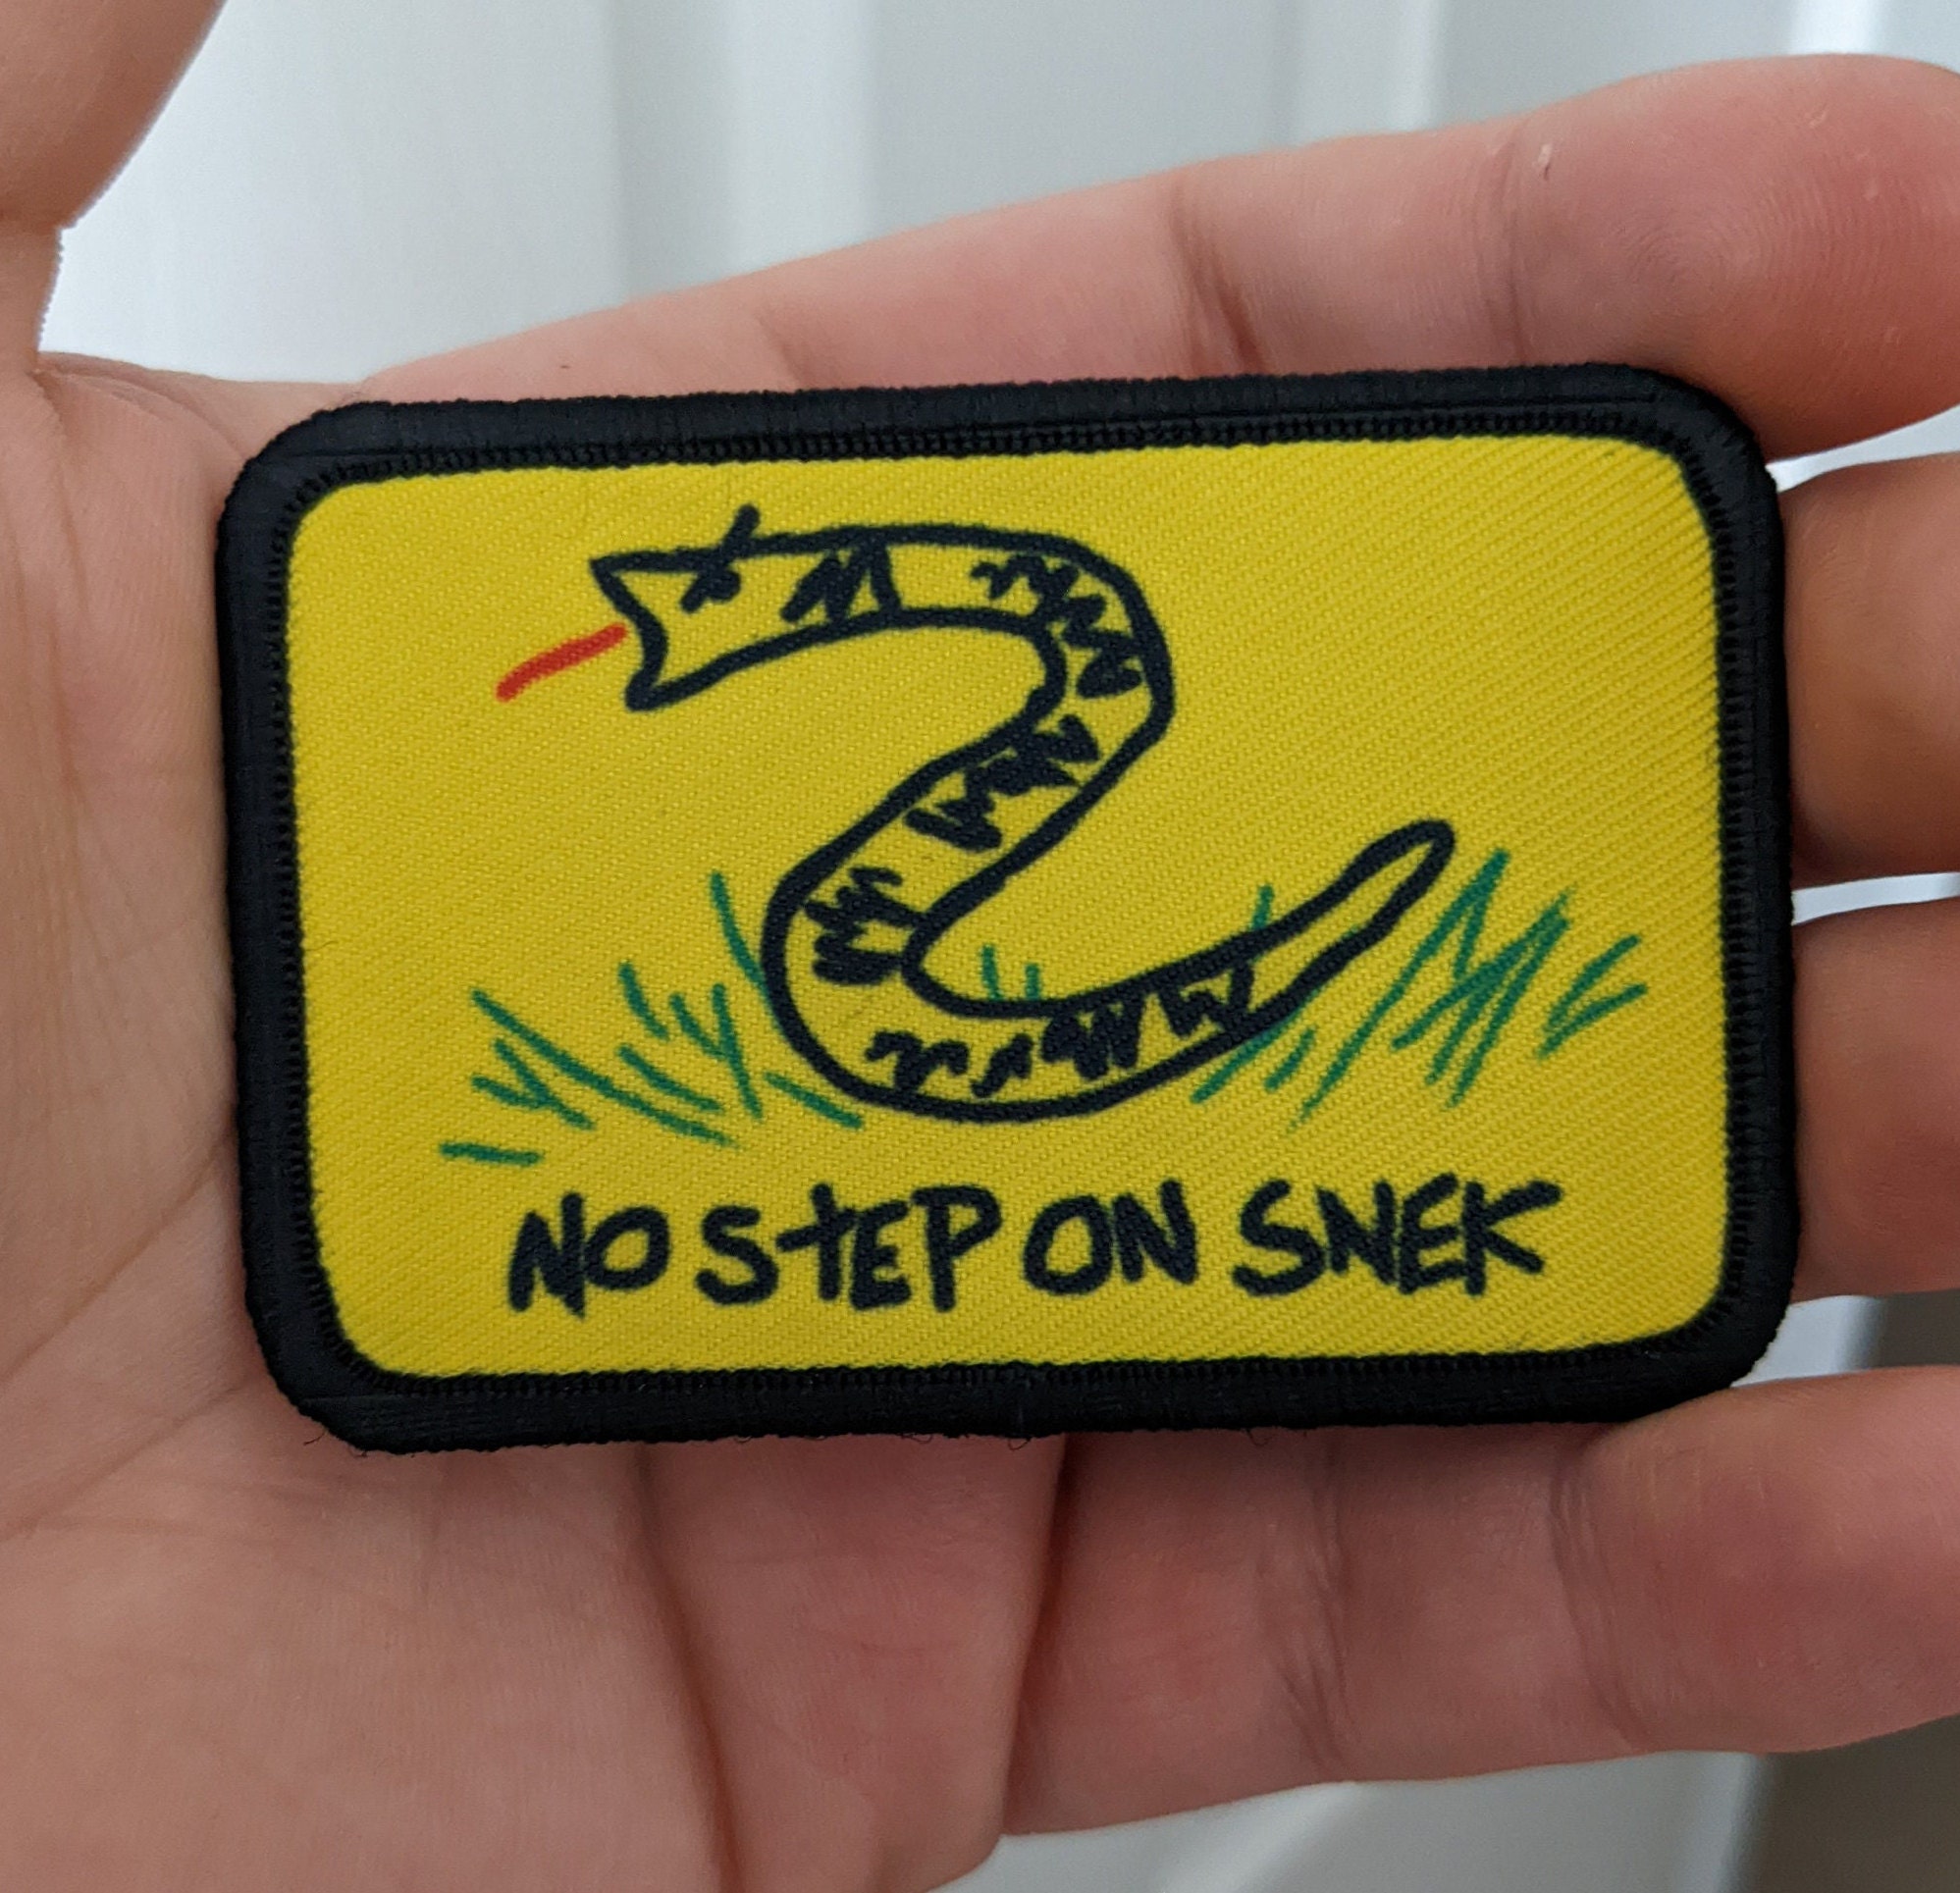 No Step on Snek, Morale Patch Funny Tactical Morale Badge Hook Loop Tactical Patch (Green-1)